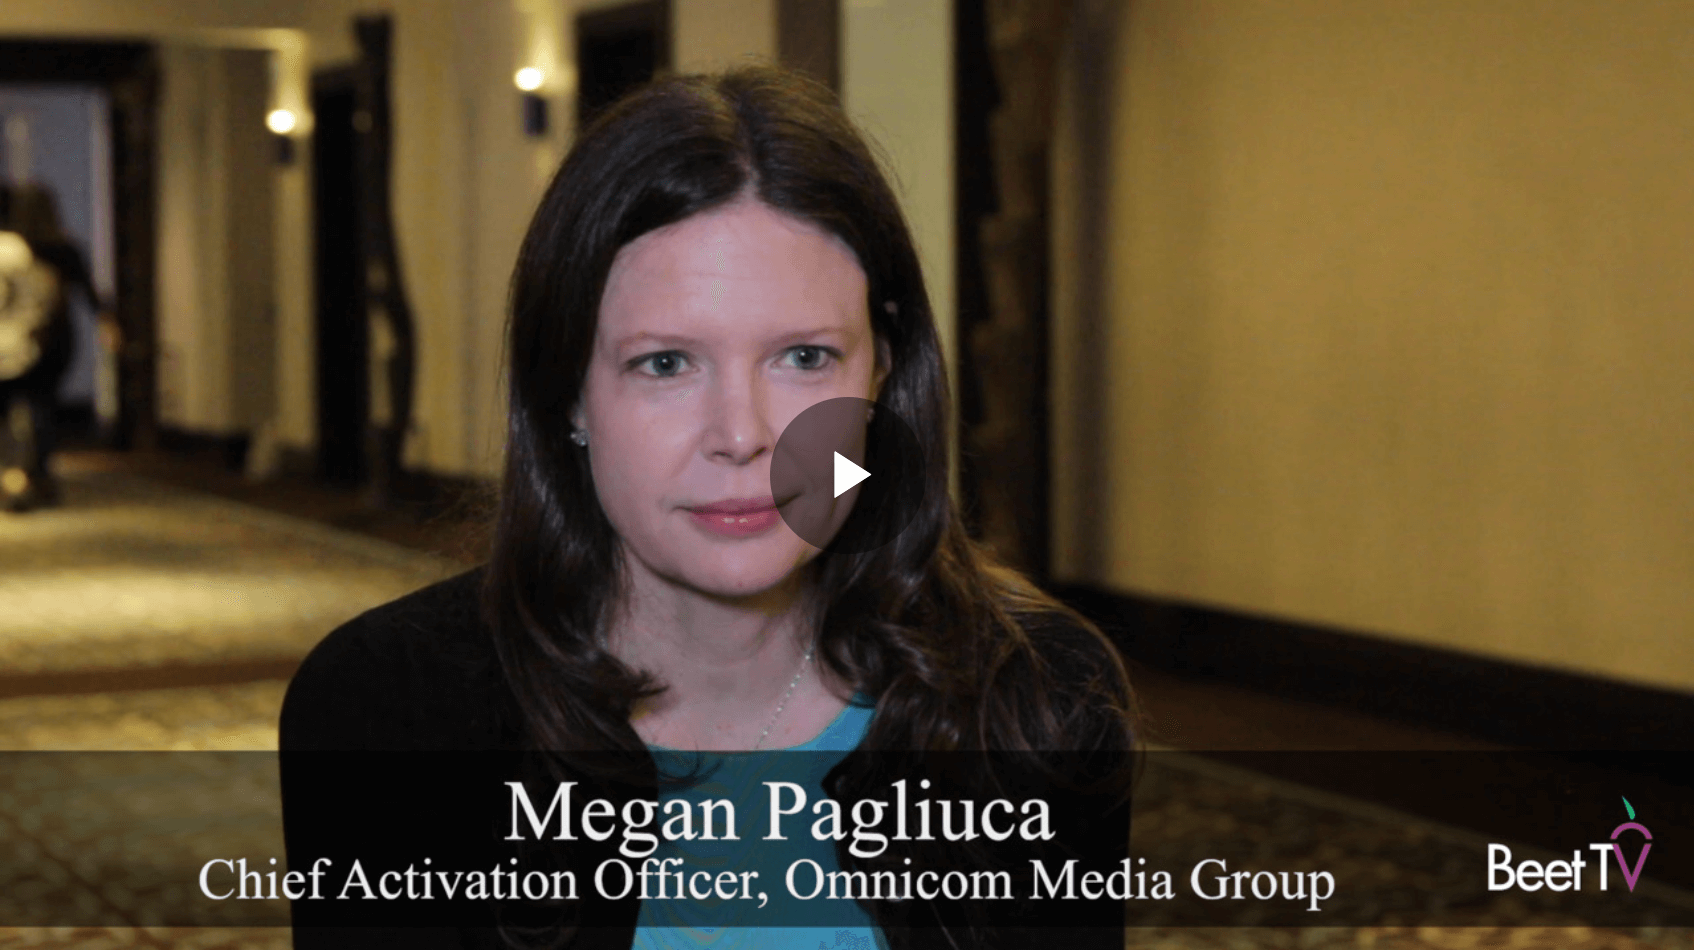 Megan Pagliuca talks to BeetTV about enabling diversity and empowering purpose